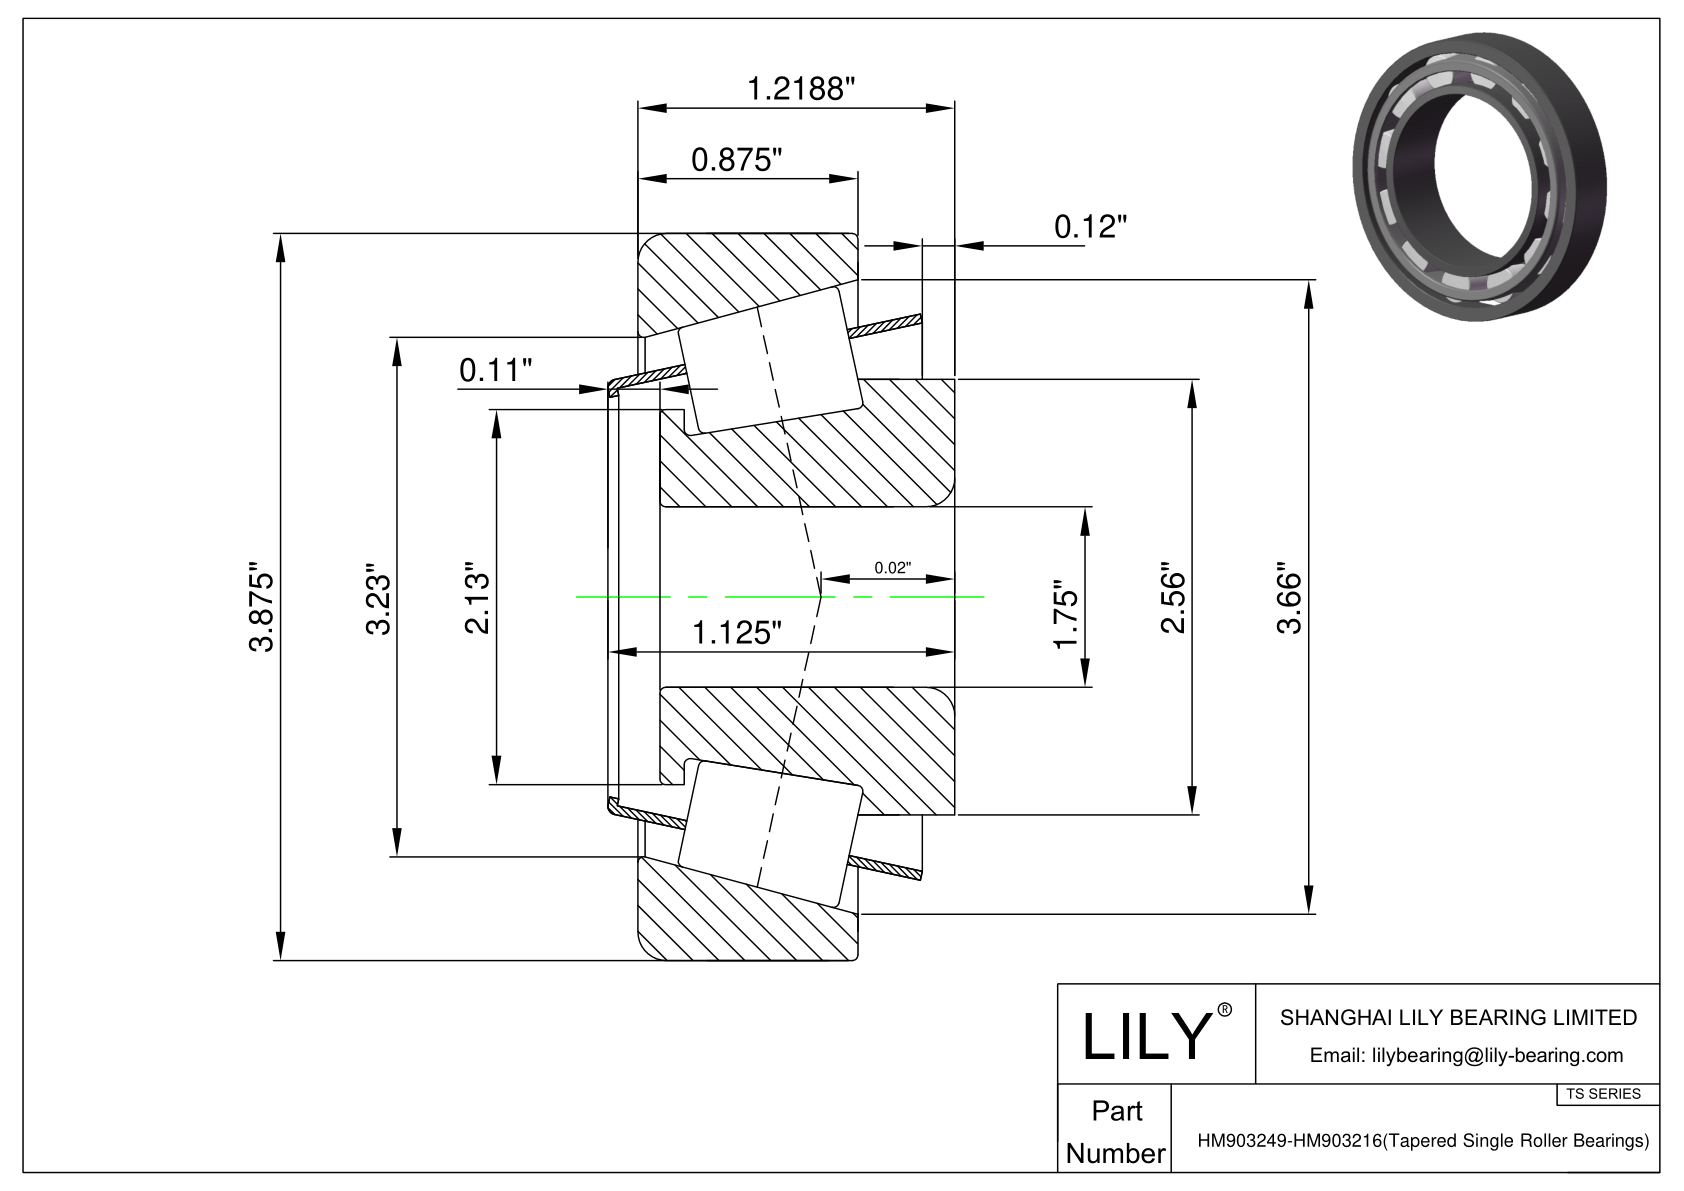 HM903249-HM903216 TS (Tapered Single Roller Bearings) (Imperial) cad drawing